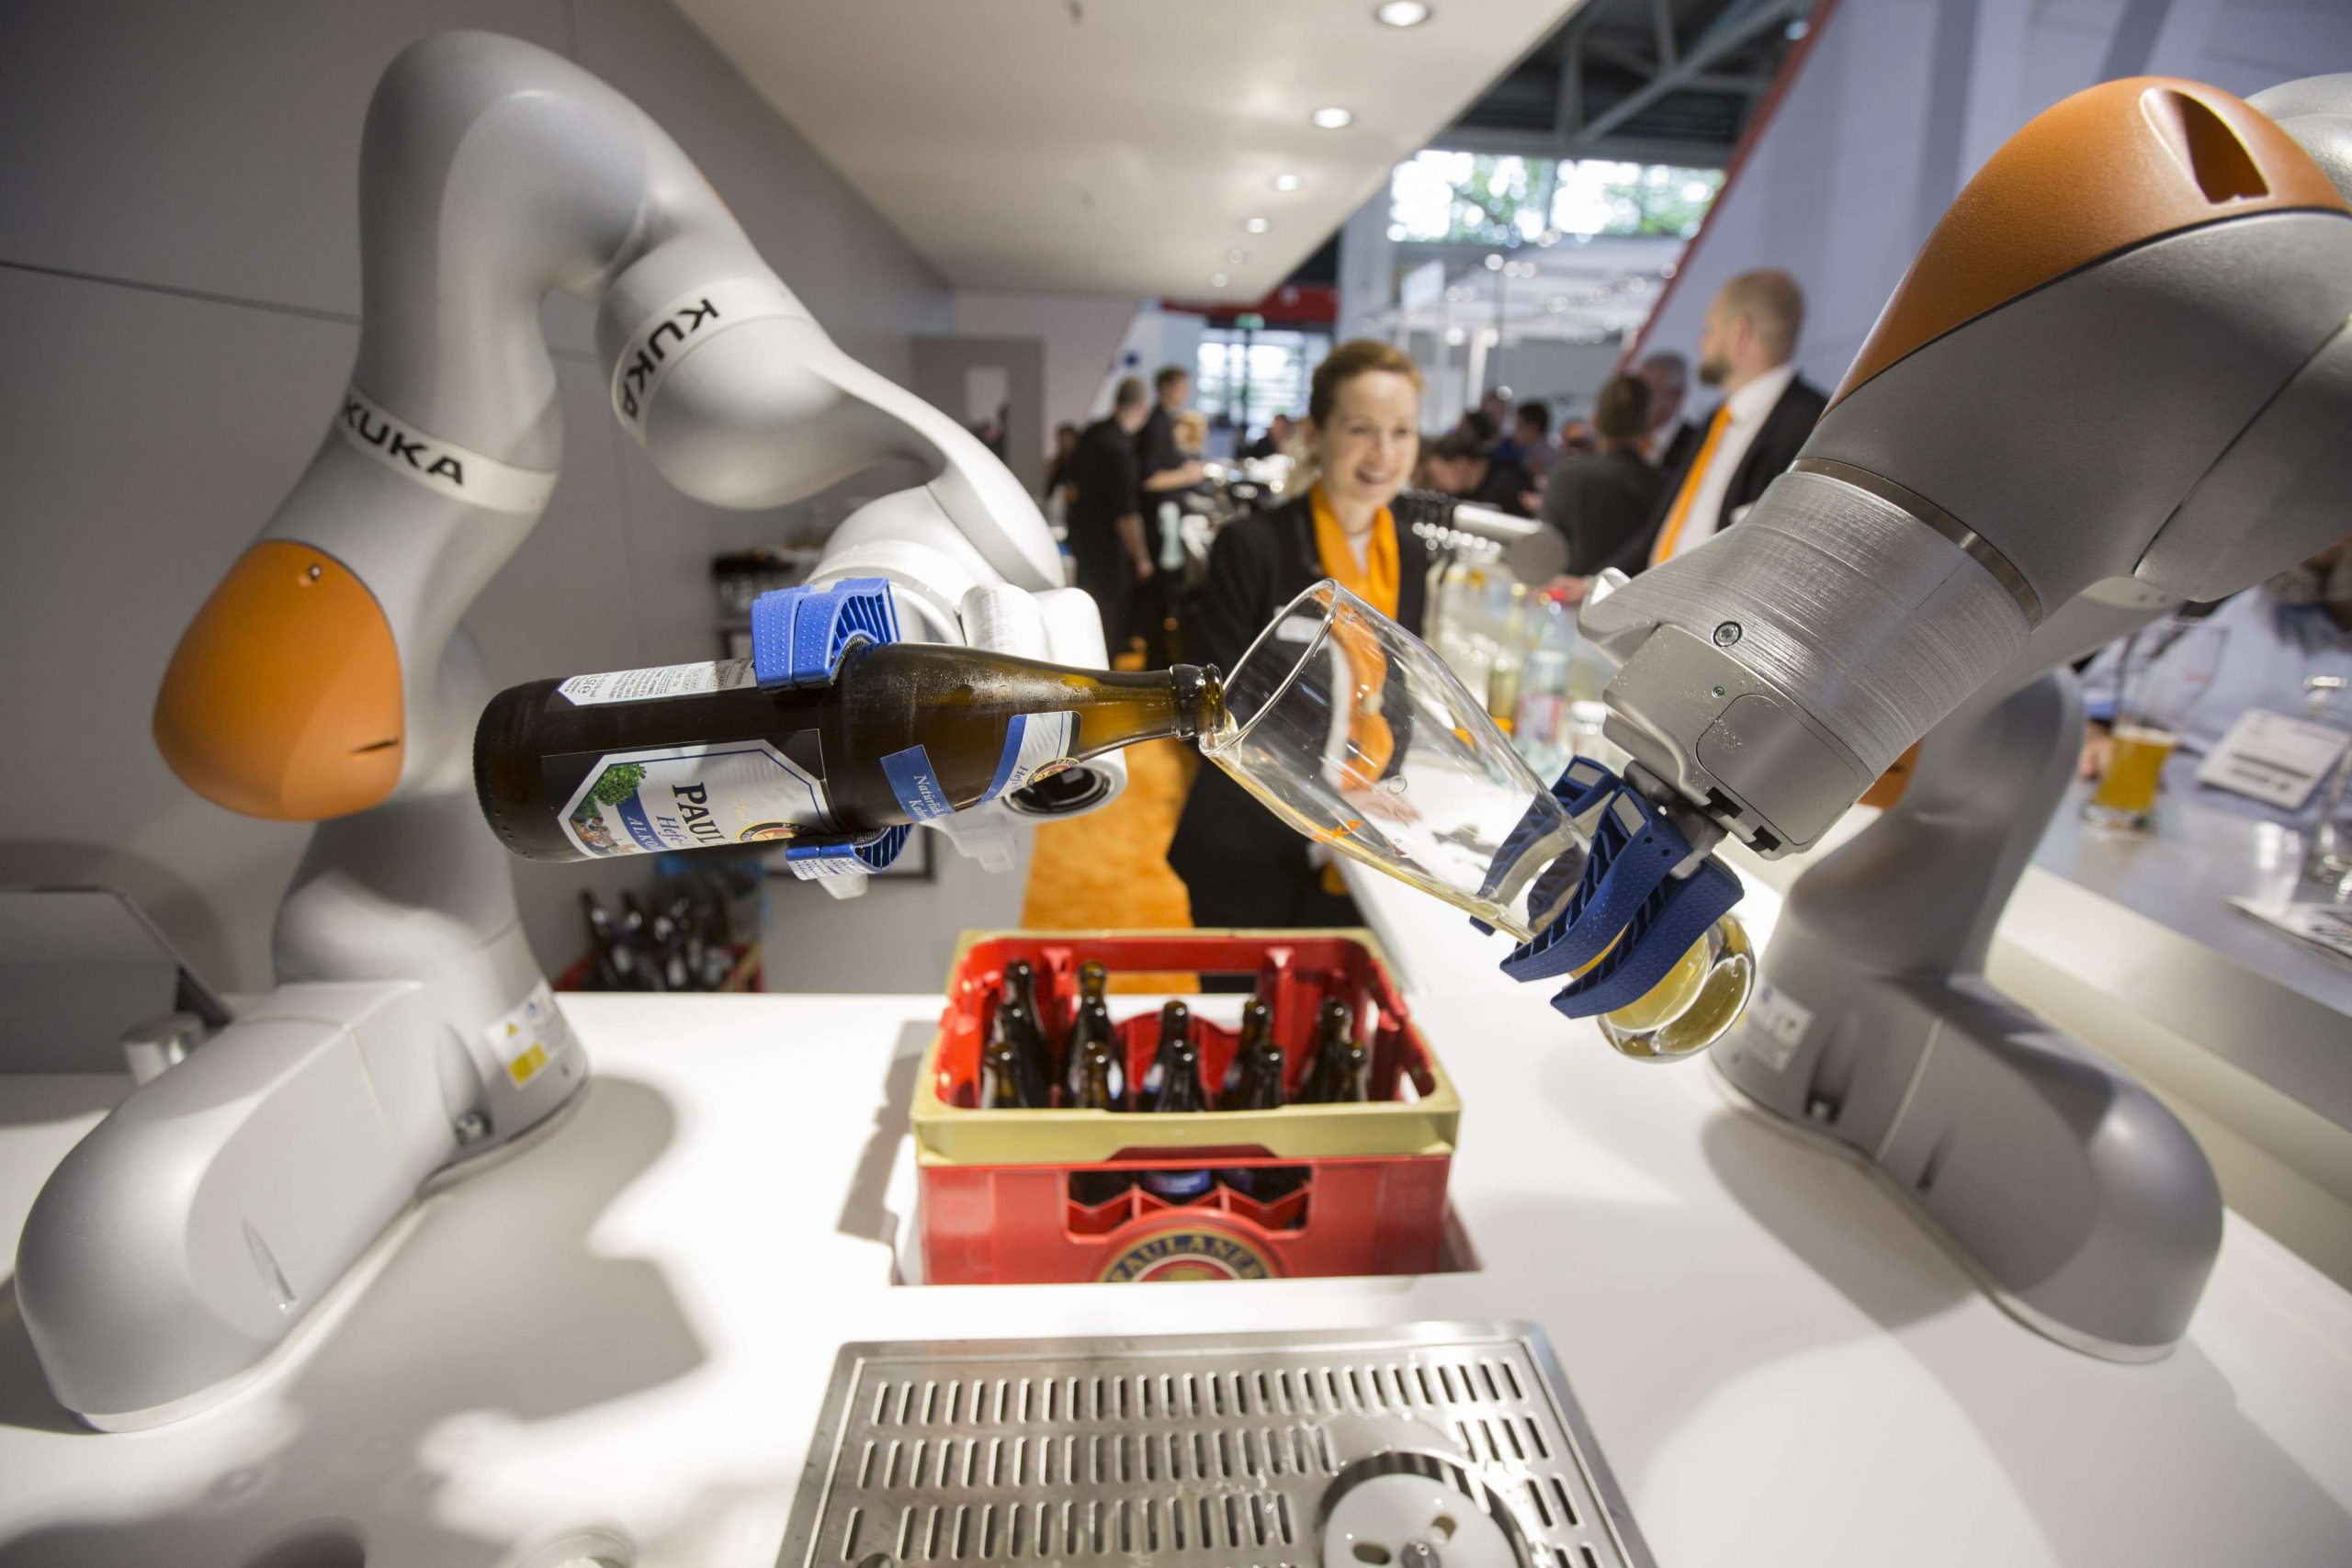 Midea to spend billions on building industrial robots after buying Kuka